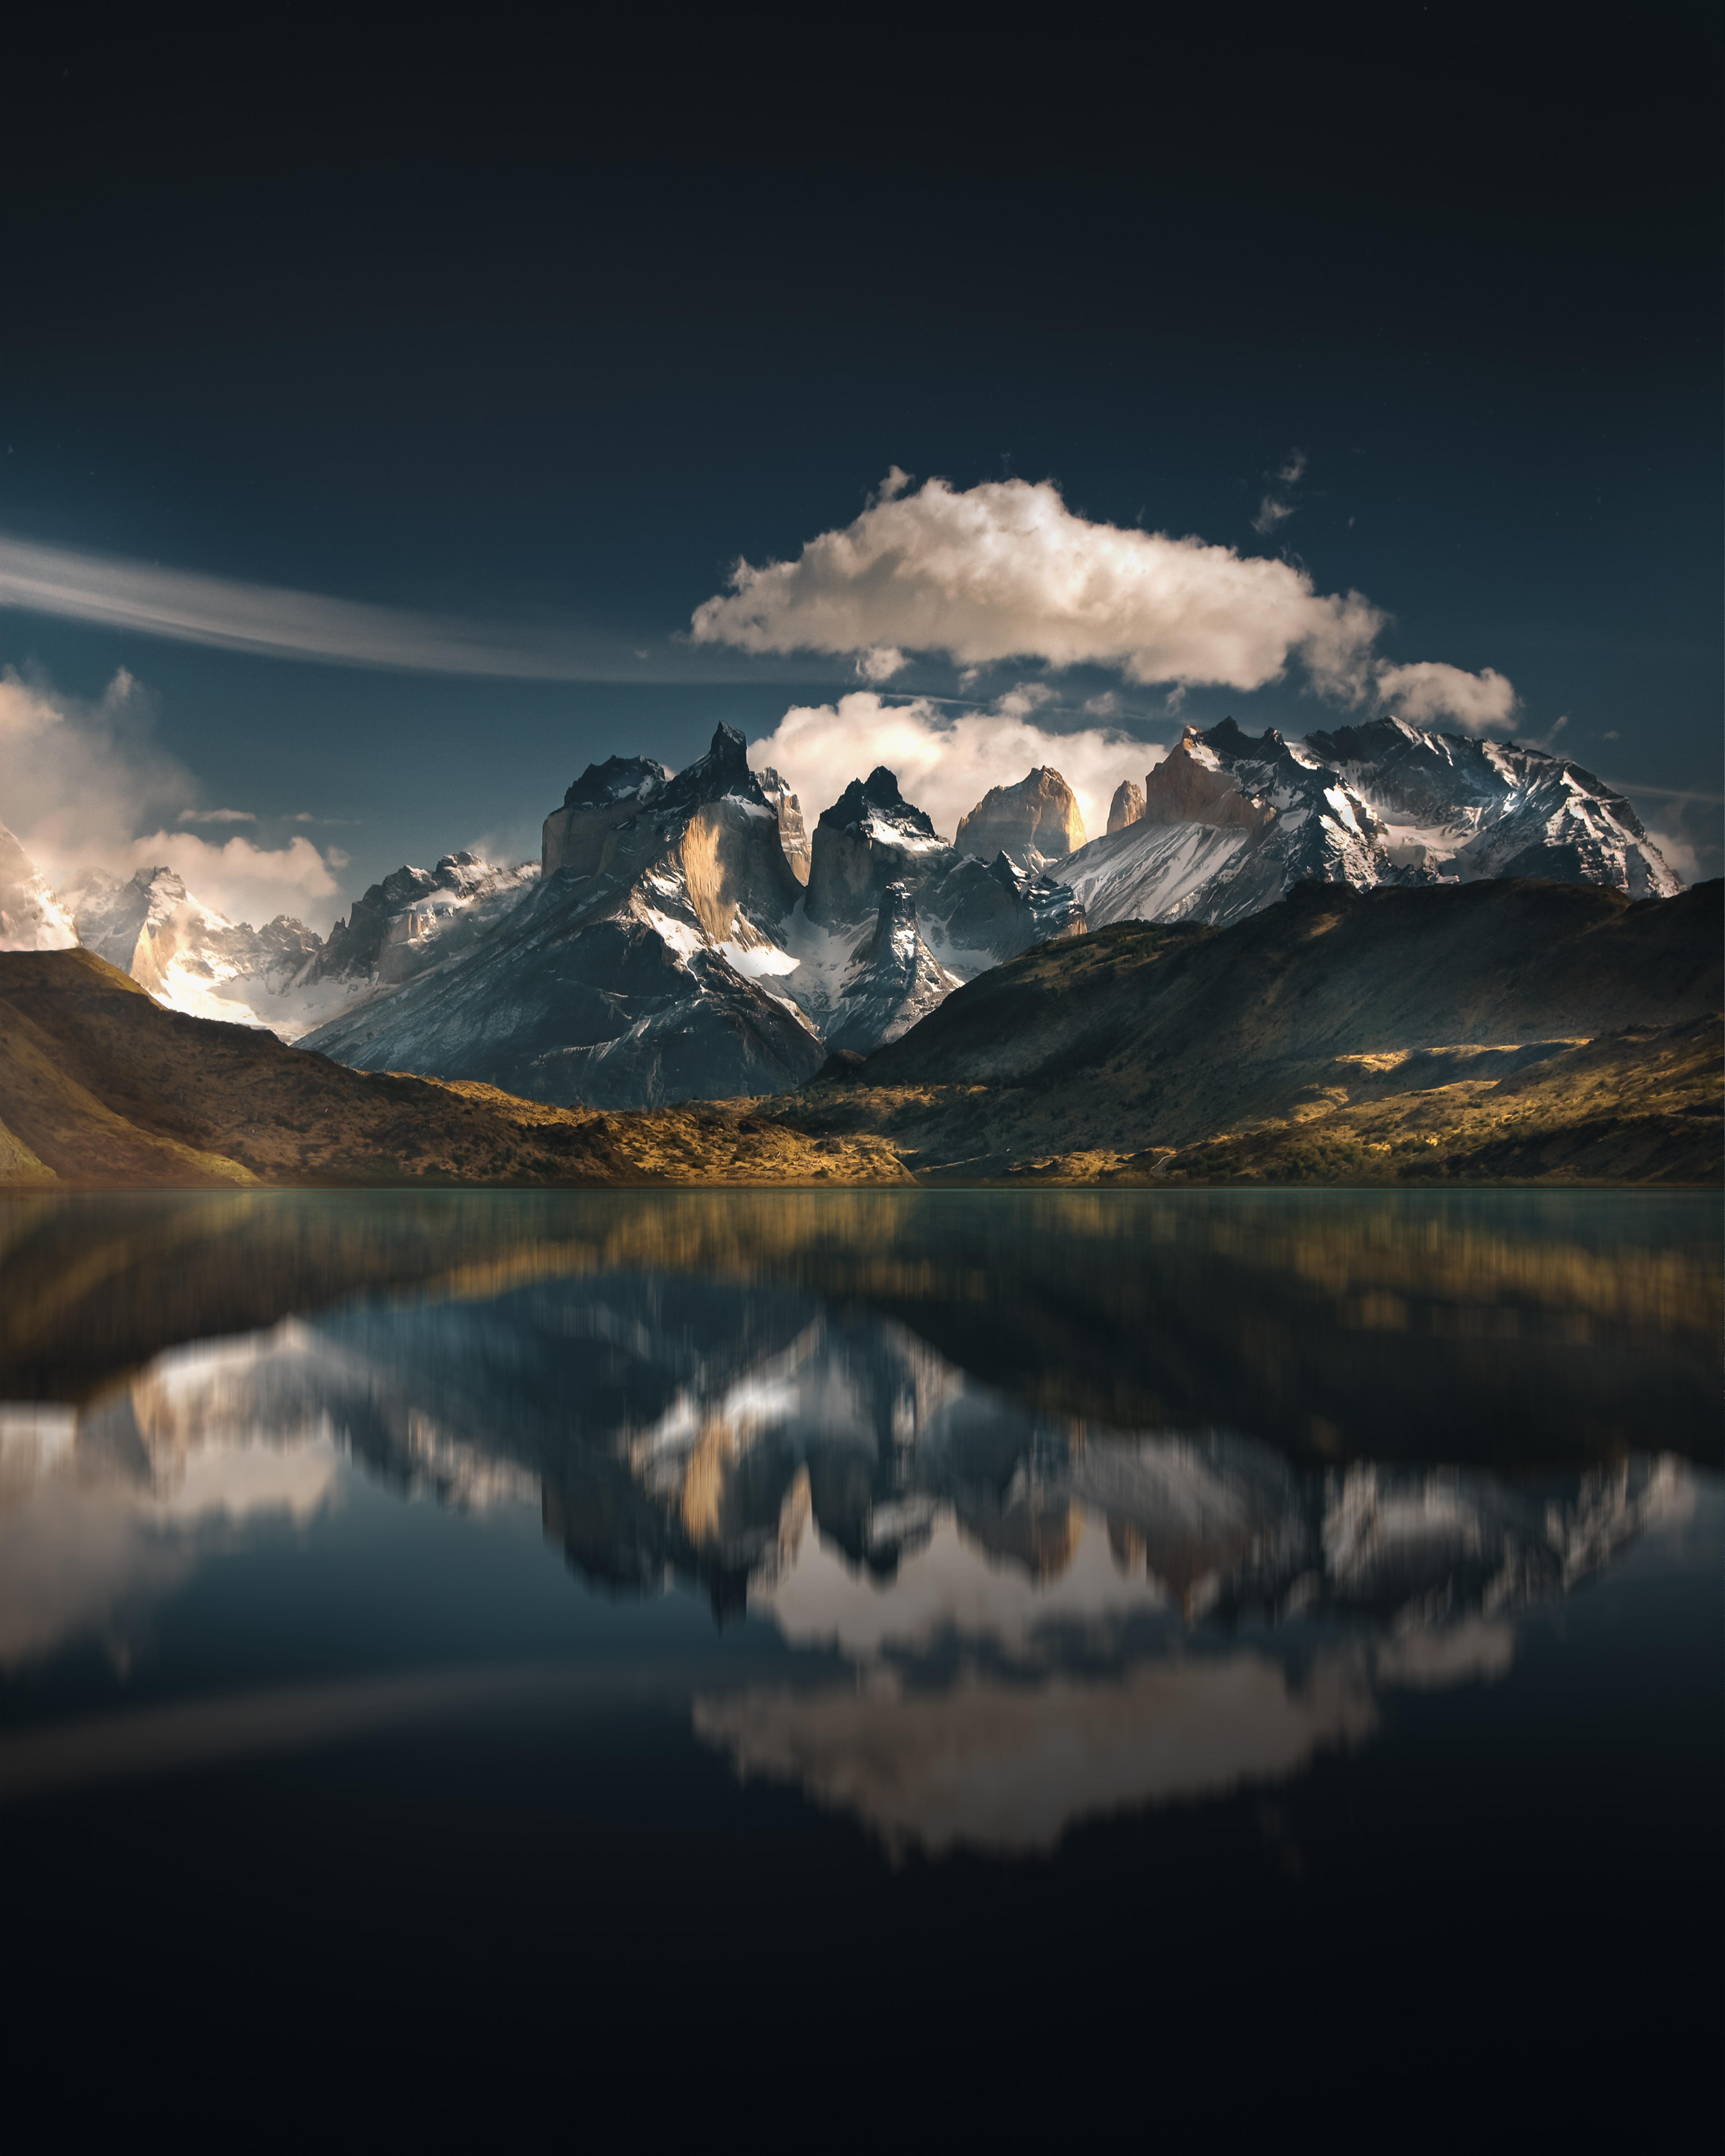 chile, mountains, nature, lake, reflection, national park, torres del paine, torres del pine